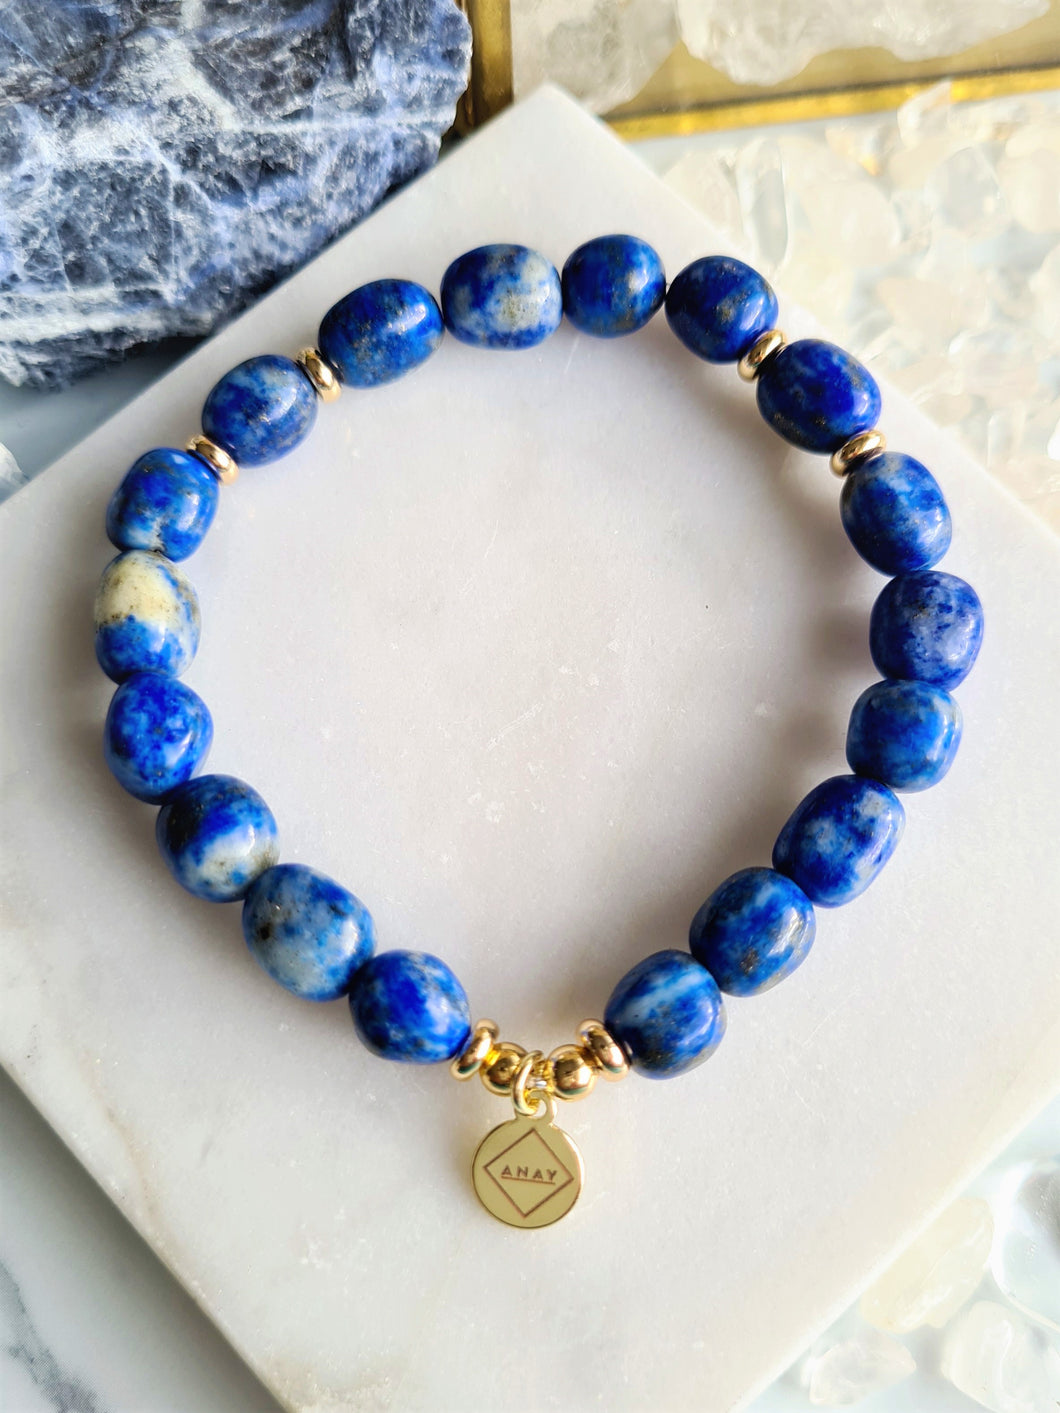 A stone of wisdom and strength, Lapis Lazuli encourages you to focus on the big picture and not be distracted by minor troubles. 